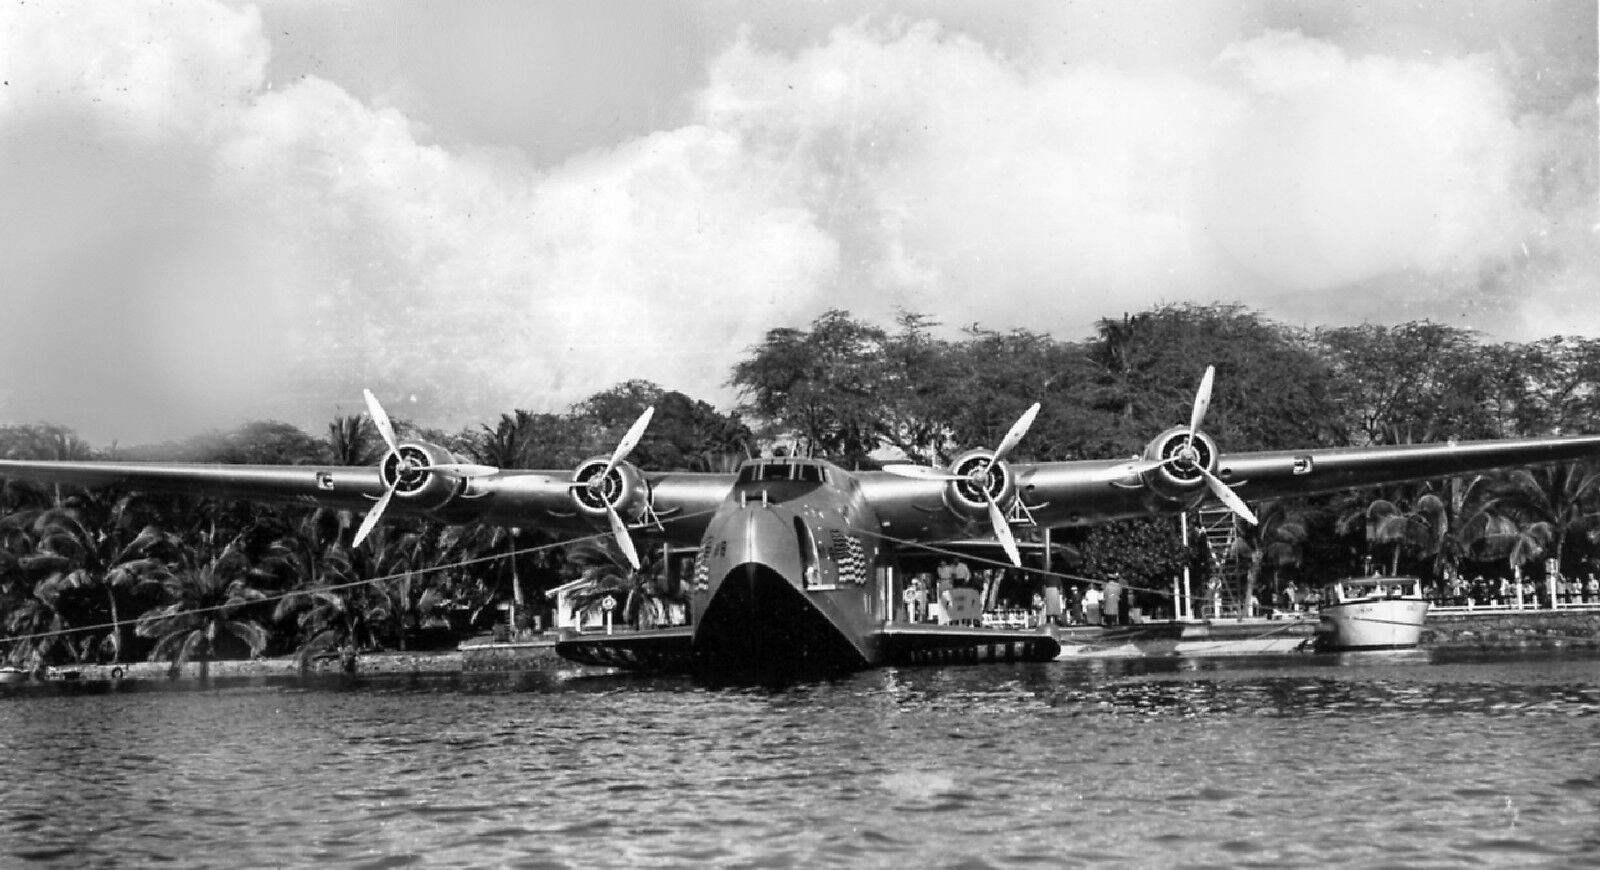  Pan Am Clipper photo Boeing B-314  Airplane Flying Boat 1930s Hawaii   